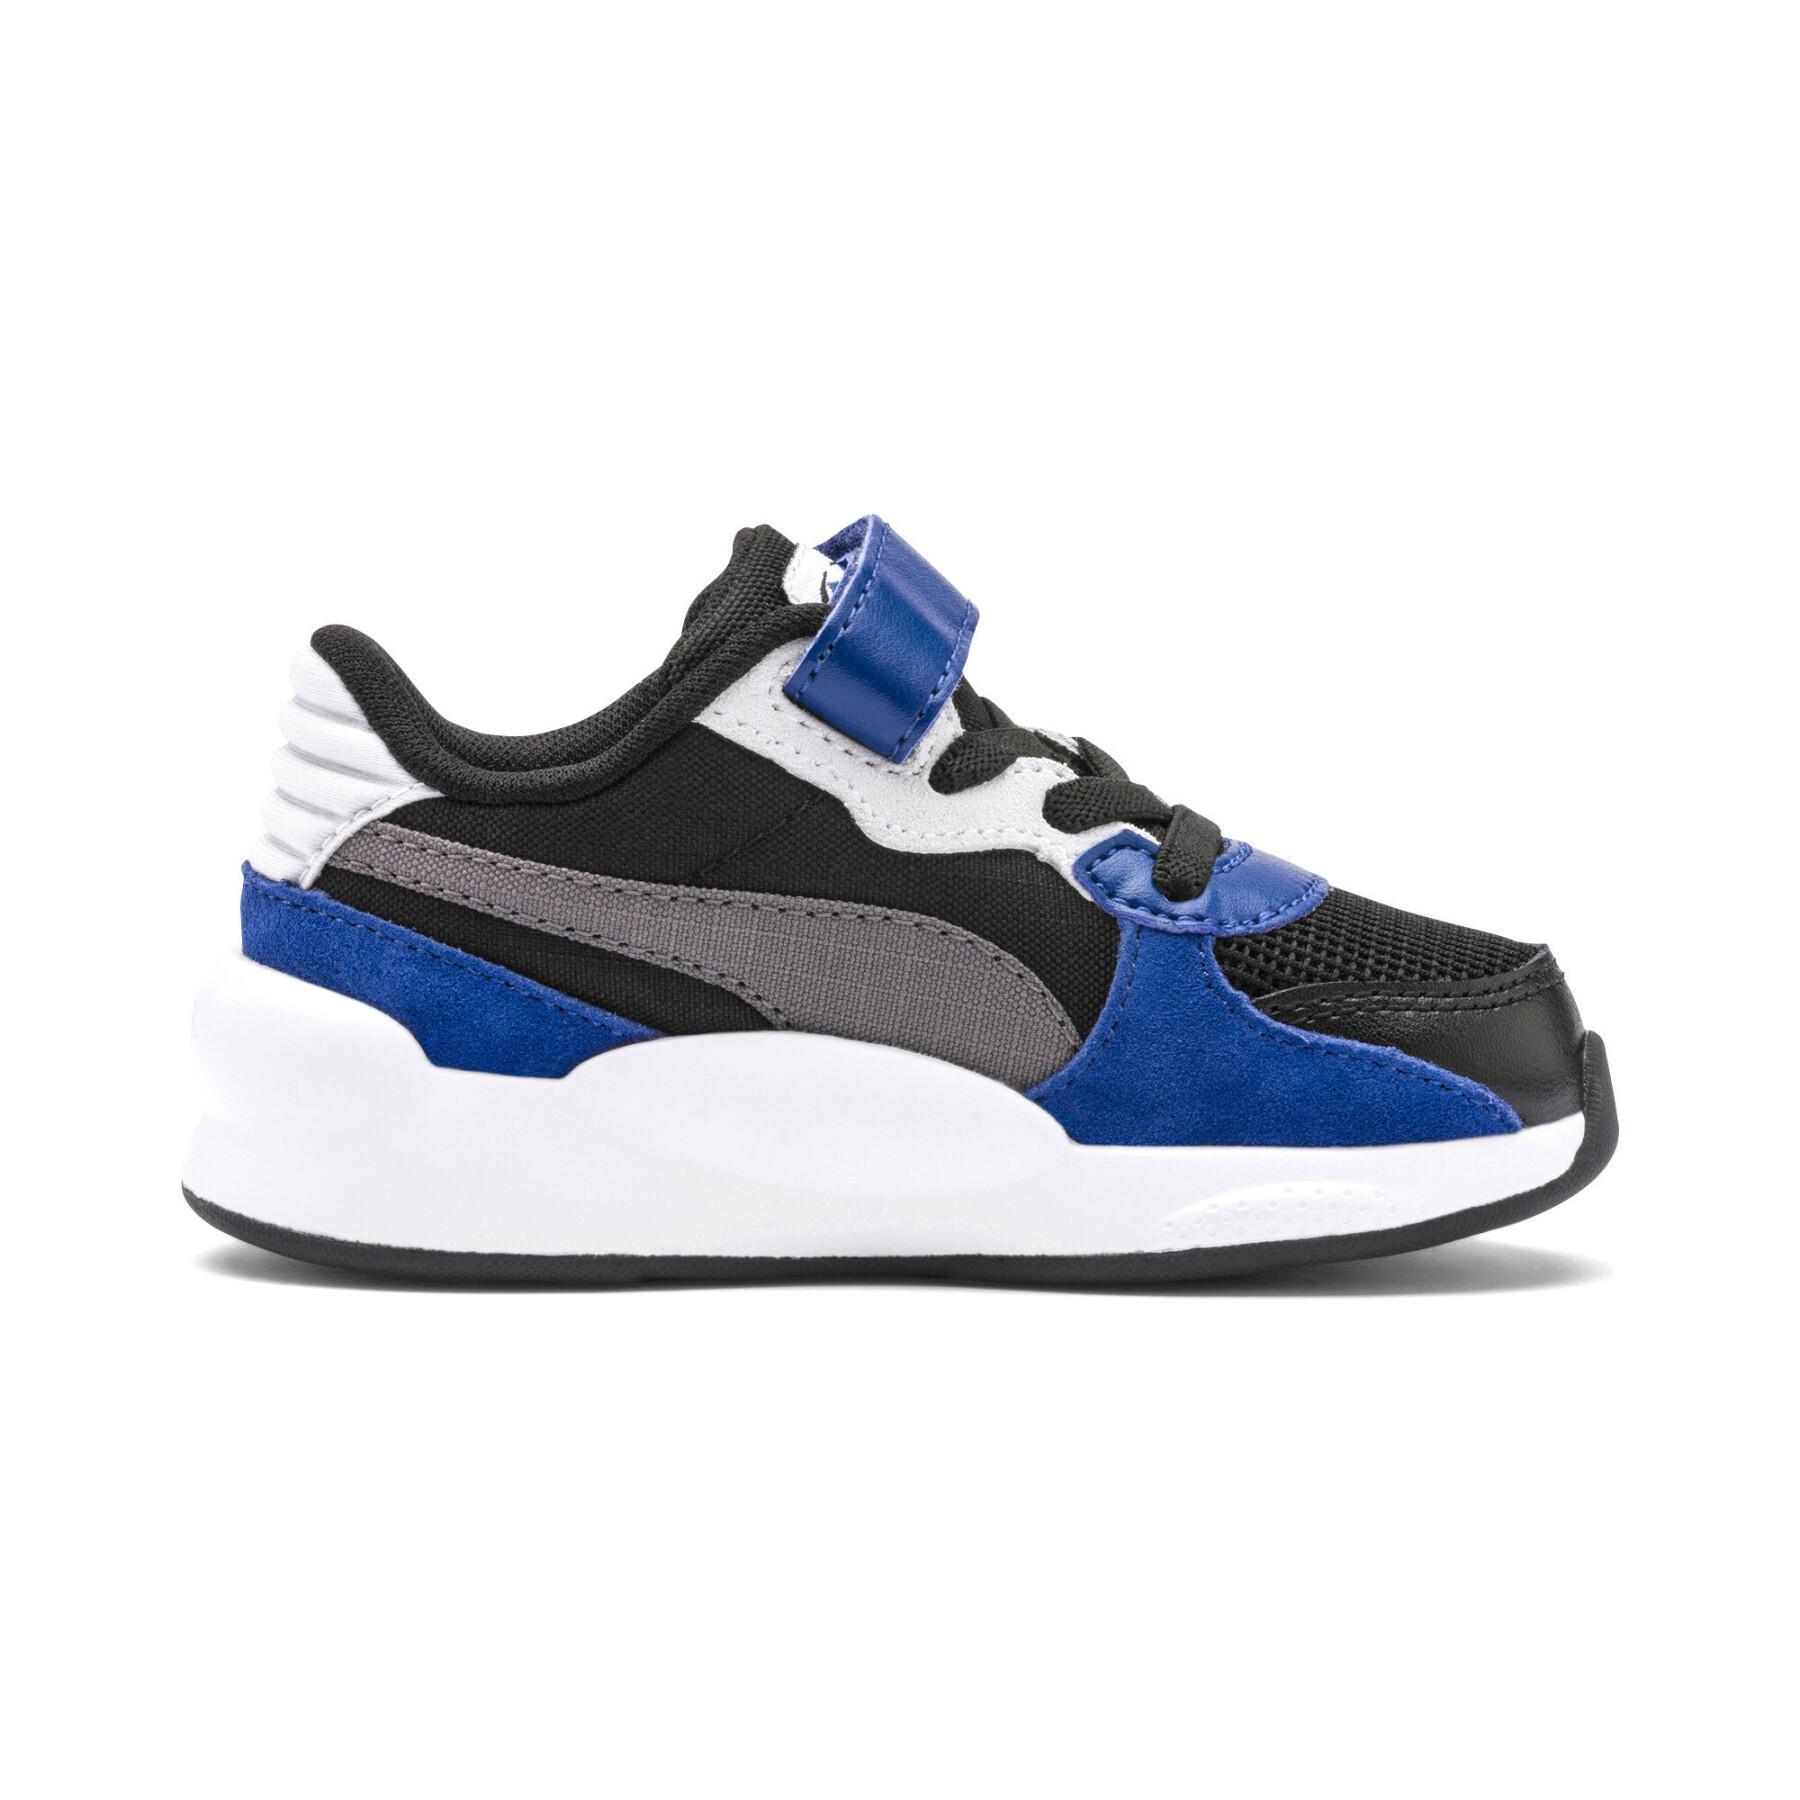 Baby girl sneakers Puma RS 9.8 Space